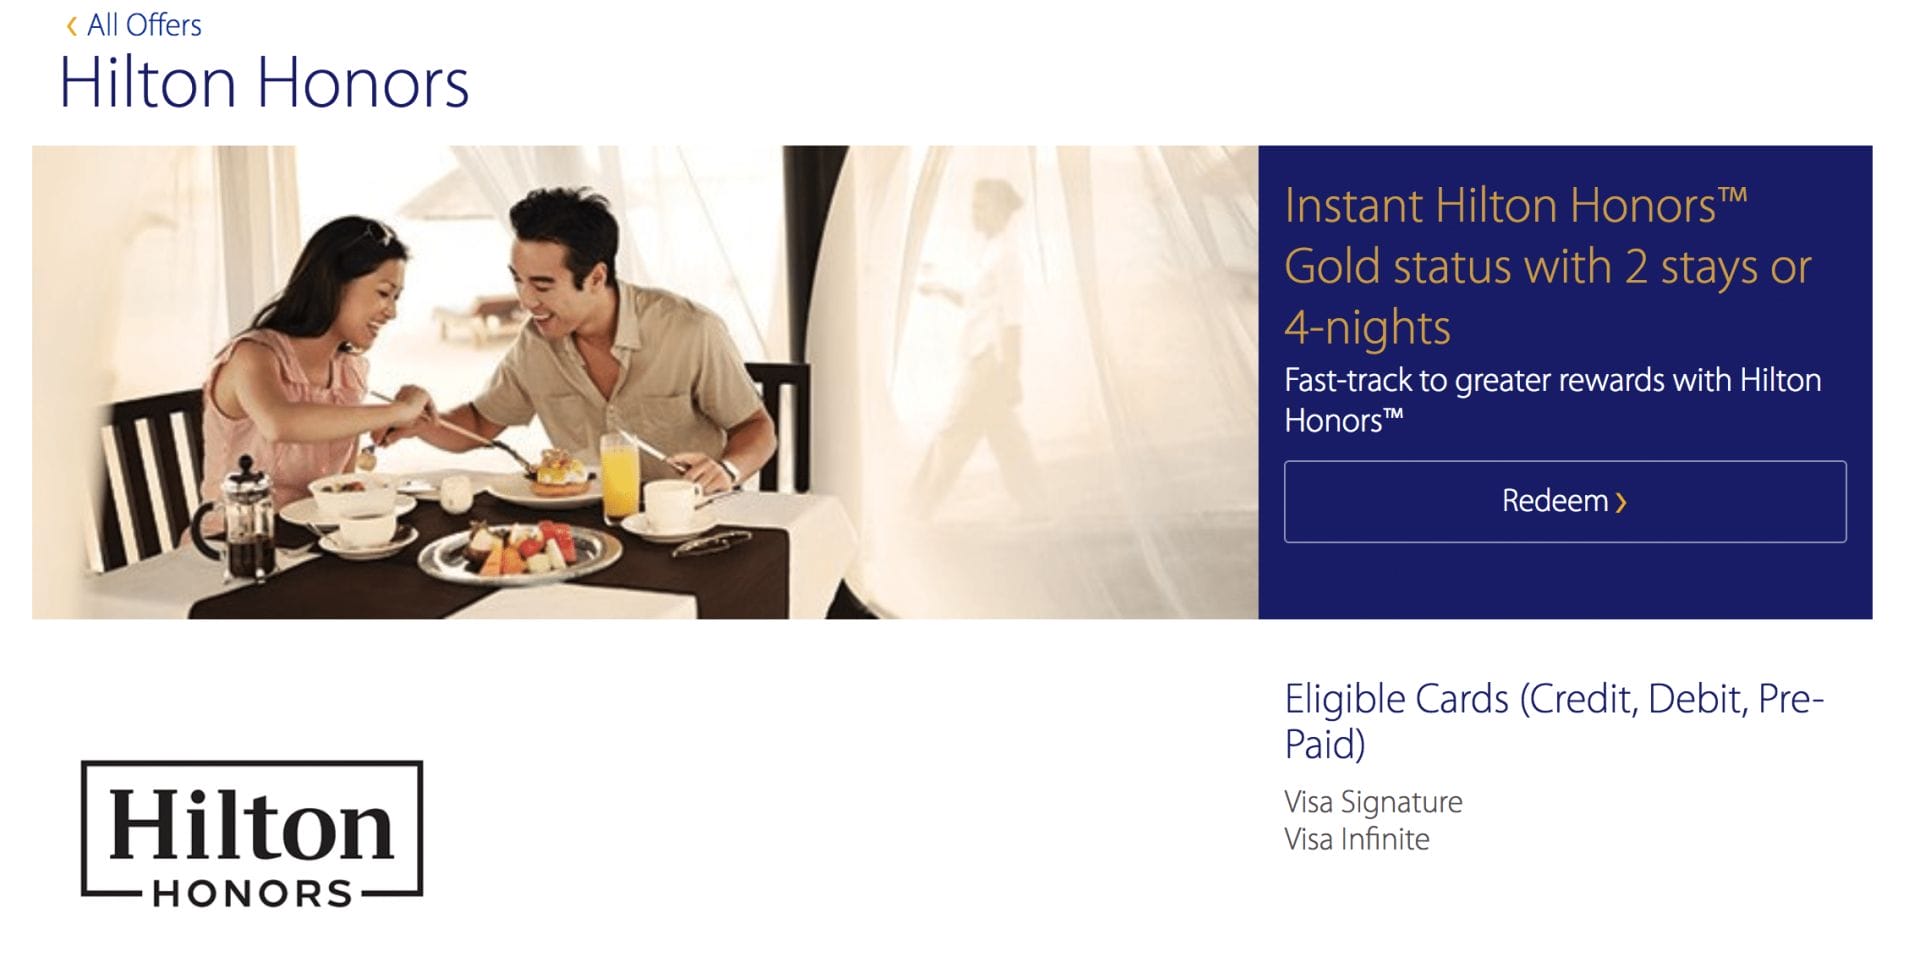 Hilton Honors Gold fast track offer for Visa Infinite (and Signature